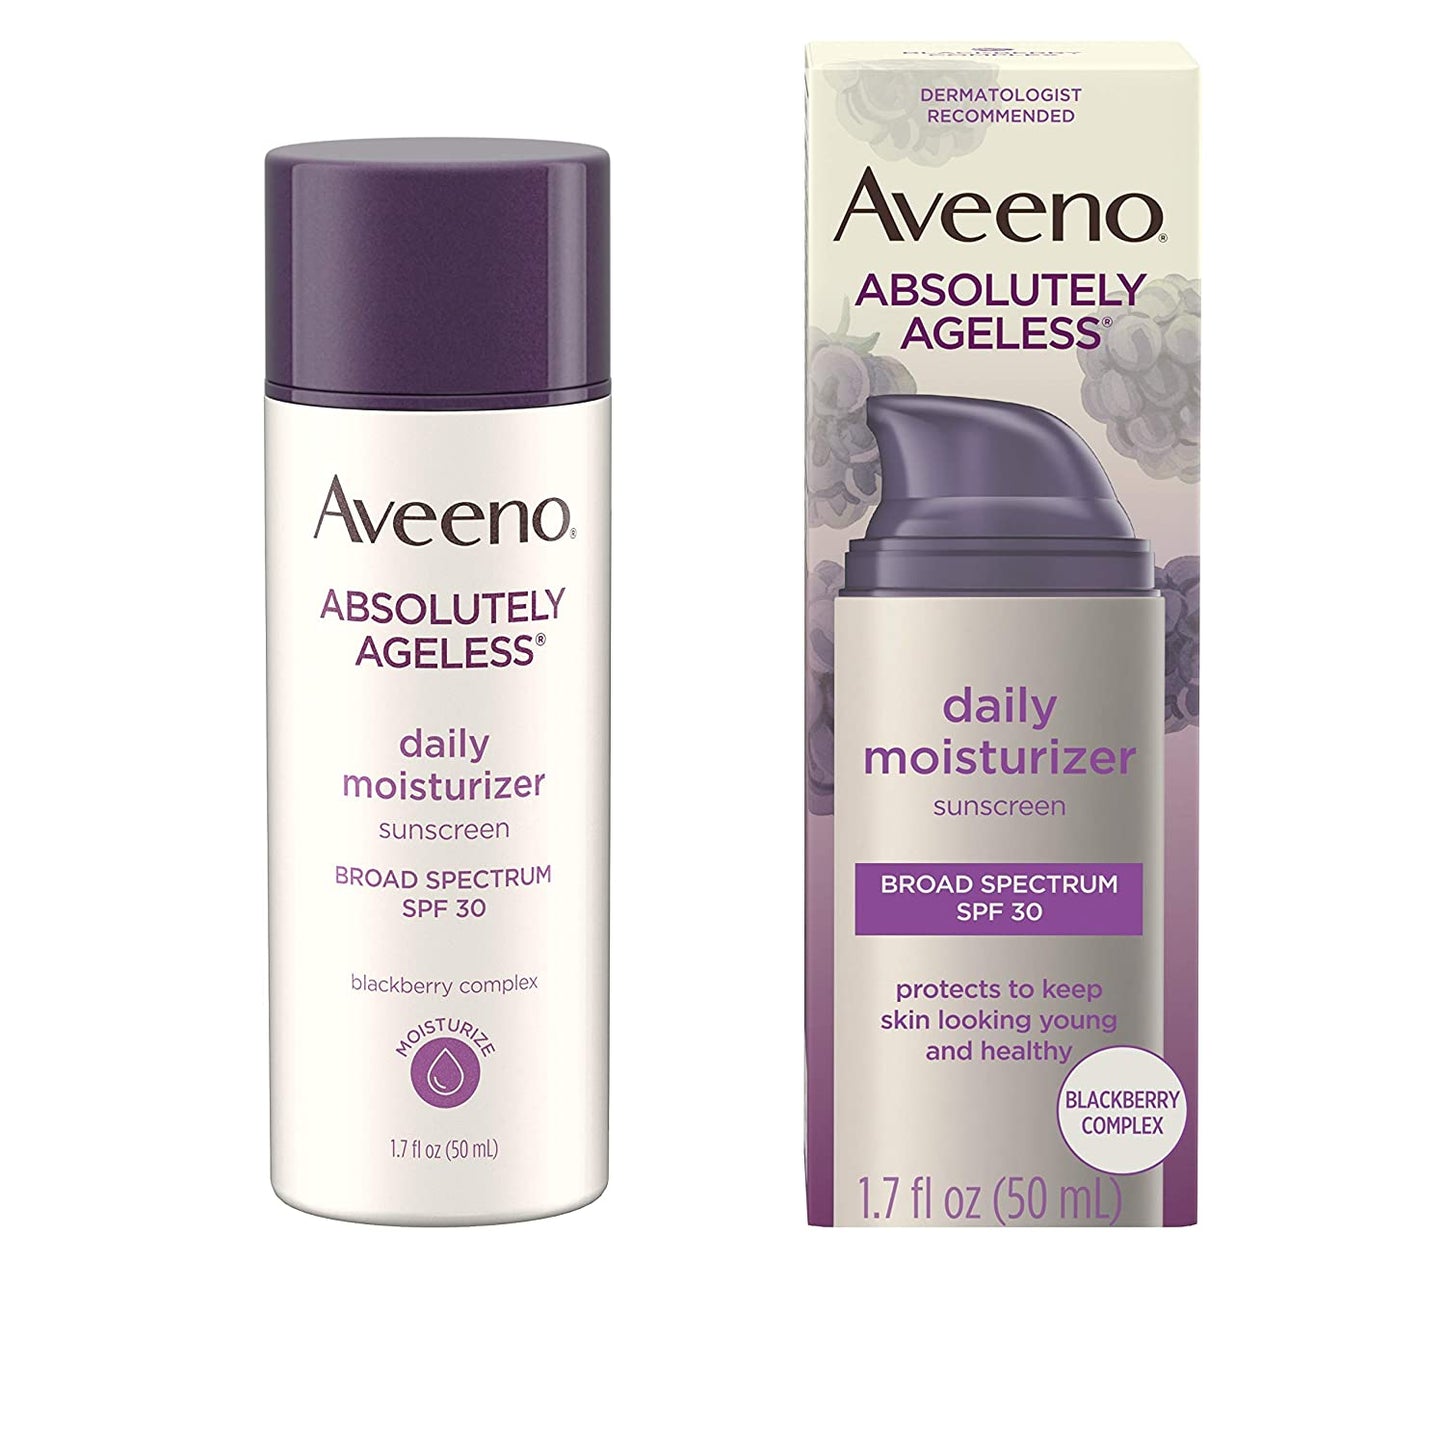 Aveeno Absolutely Ageless Daily Moisturizer with Sunscreen Broad Spectrum SPF 30, 1.7 fl.oz / 50ml